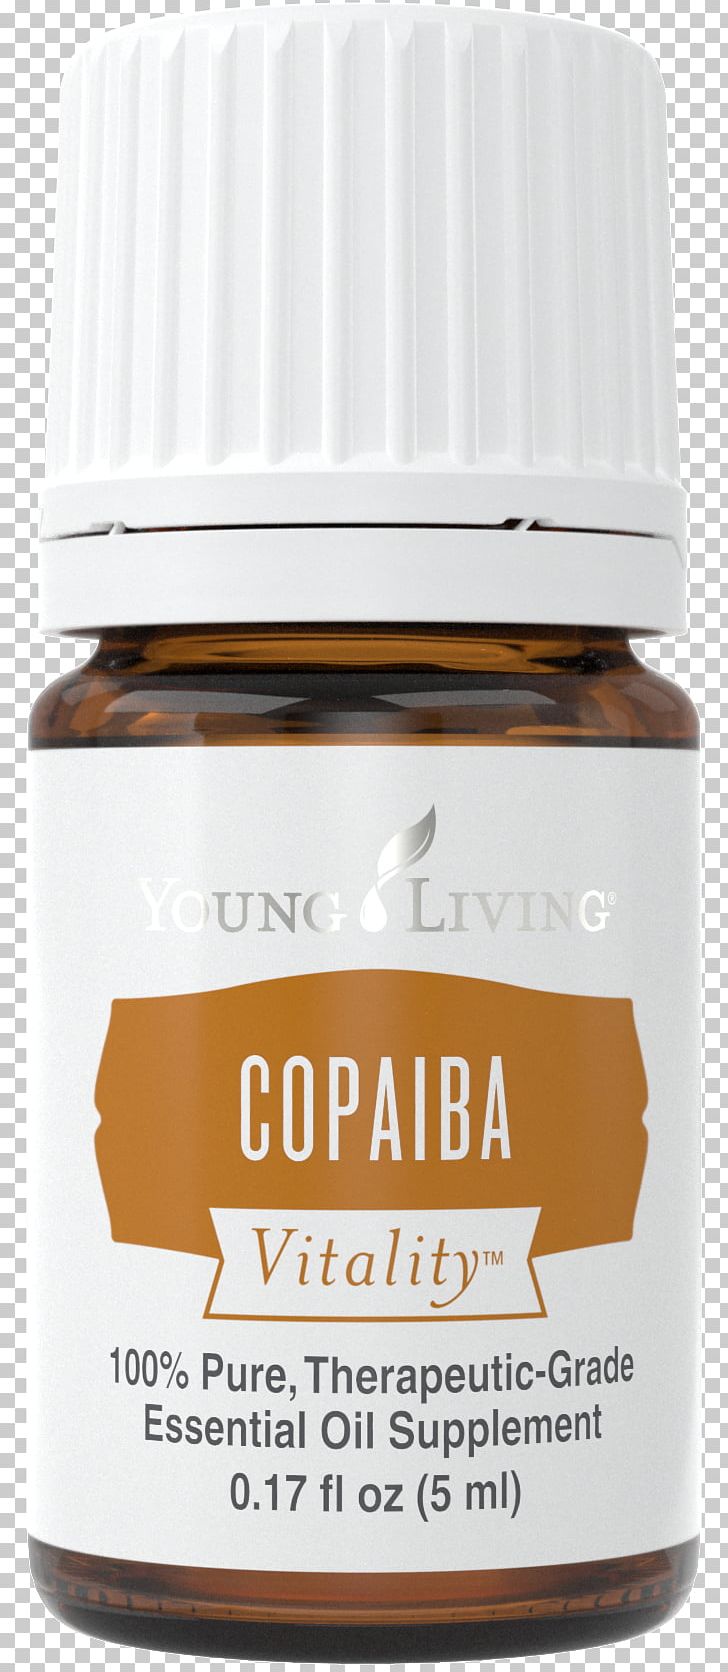 Young Living Essential Oil Copaiba Nutmeg PNG, Clipart, Bark, Cinnamon, Clove, Copaiba, Essential Oil Free PNG Download